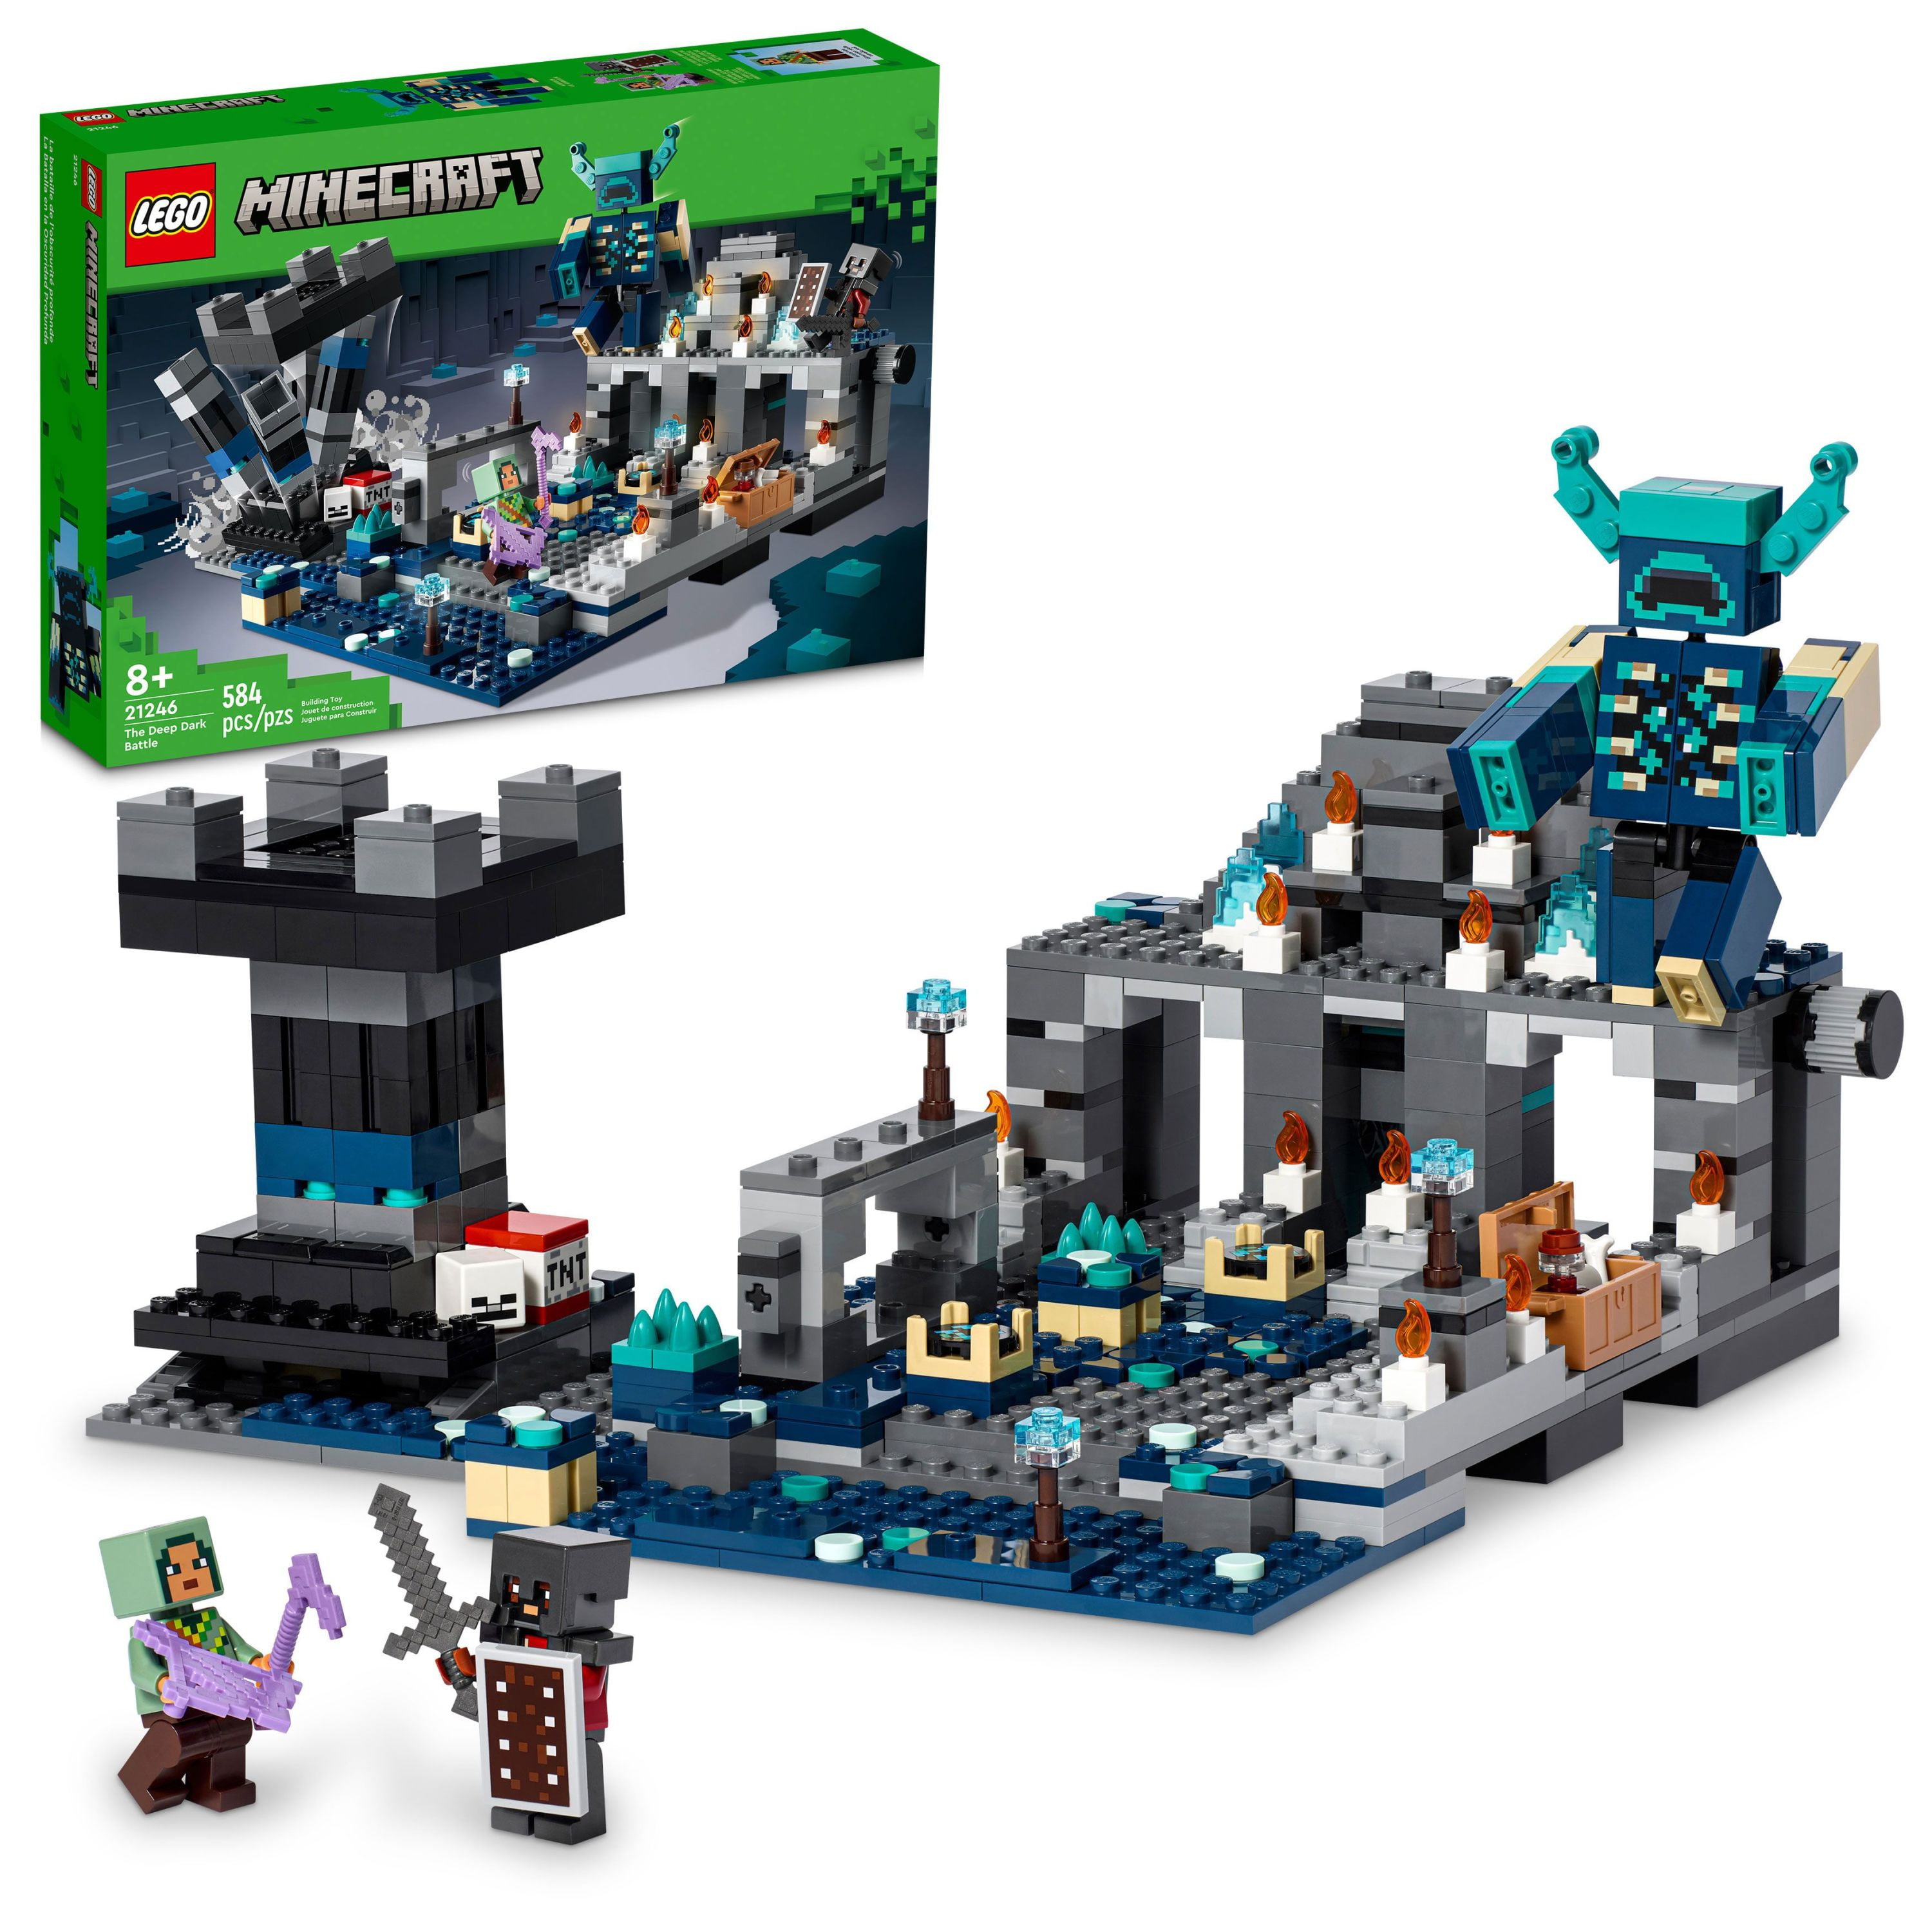 LEGO Minecraft The Deep Dark Battle Set, 21246 Biome Adventure Ancient City with Warden Figure, Exploding Tower & Treasure Chest, for Kids Ages 8 years old and up - Walmart.com